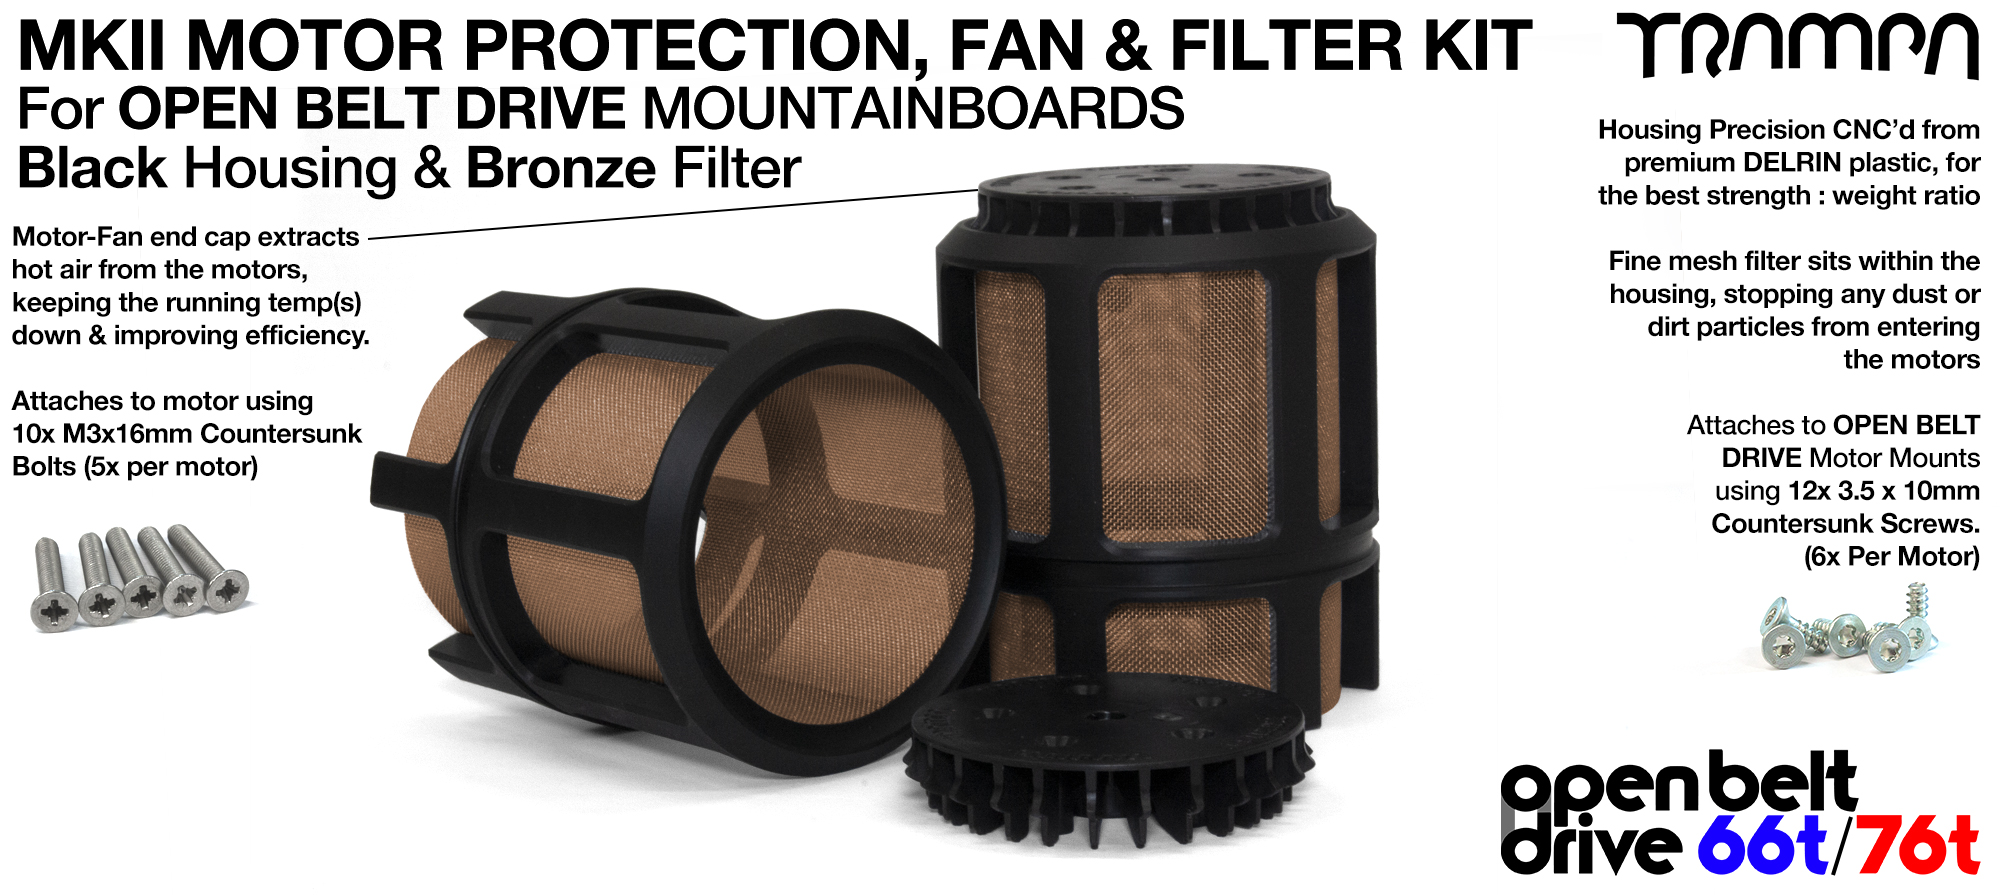 FULL CAGE Motor protection SUPER STRONG DELRIN Plastic includes Fan & BRONZE Filter - TWIN